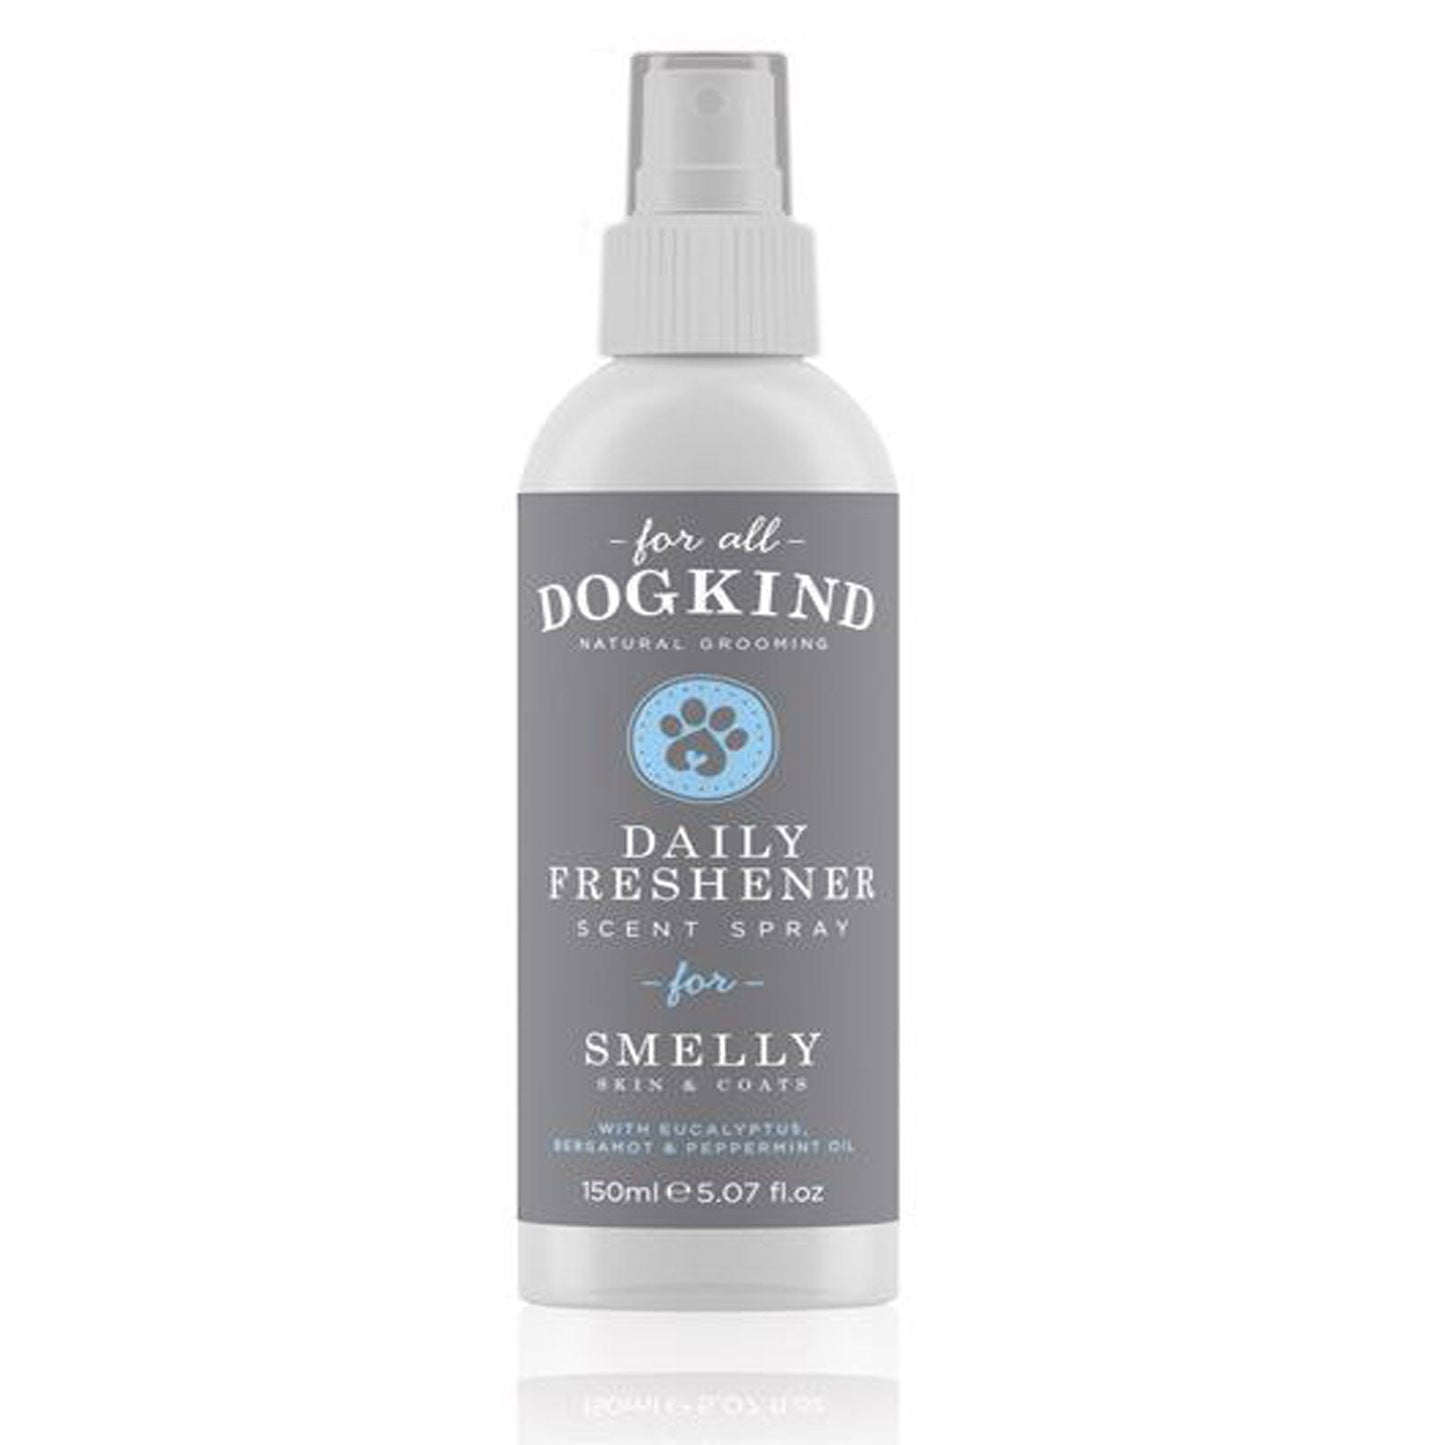 For All Dogkind Daily Freshener Scent Spray 150ml